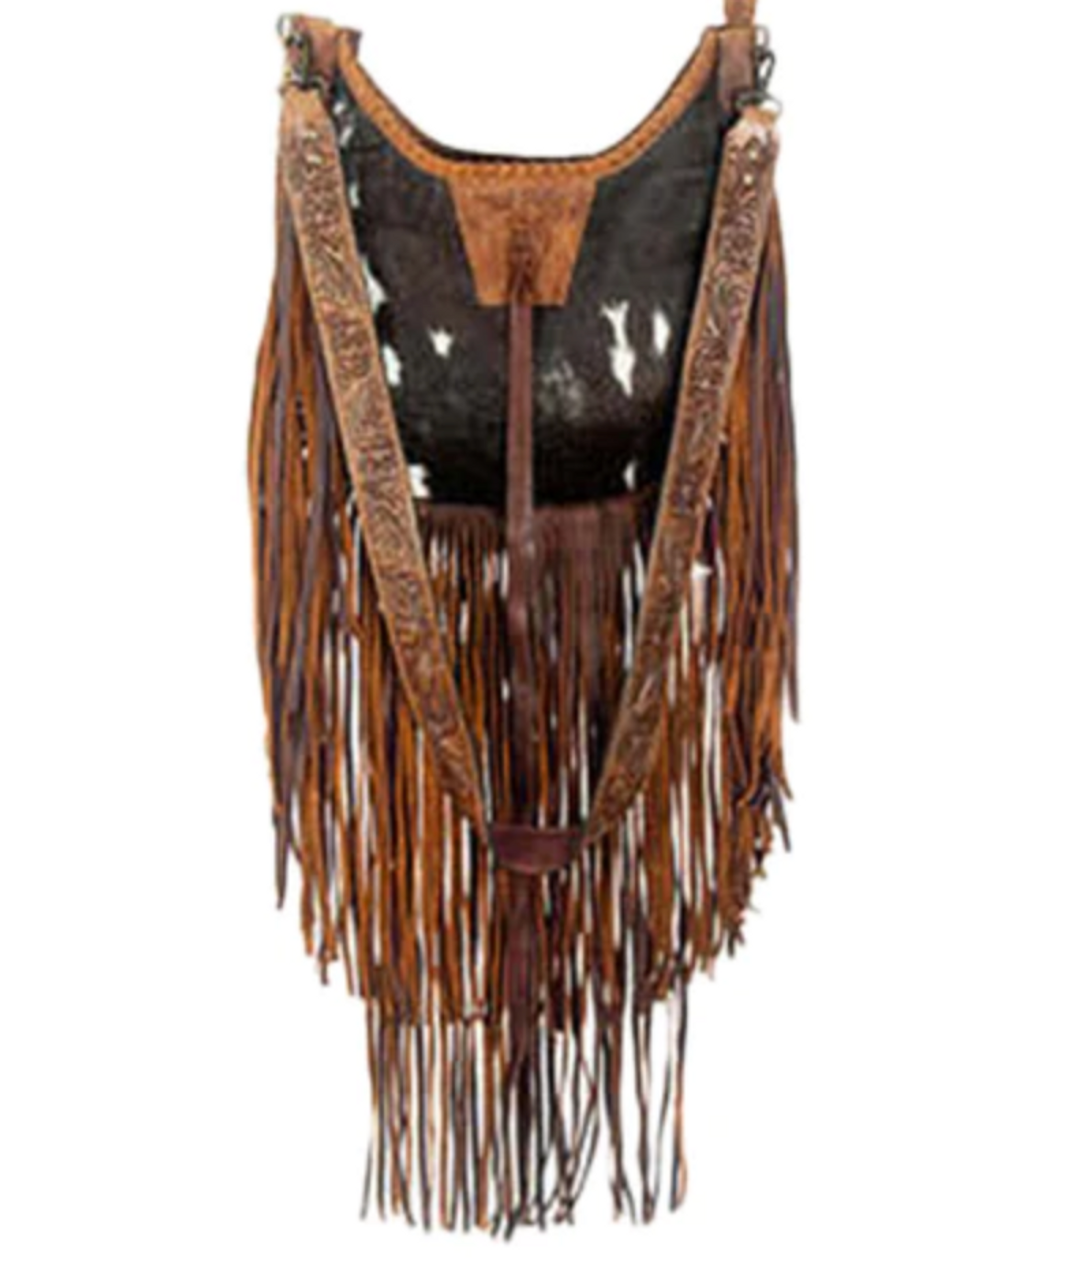 CLEARANCE! Brown and White Cowhide Carryall Leather Fringe Bag